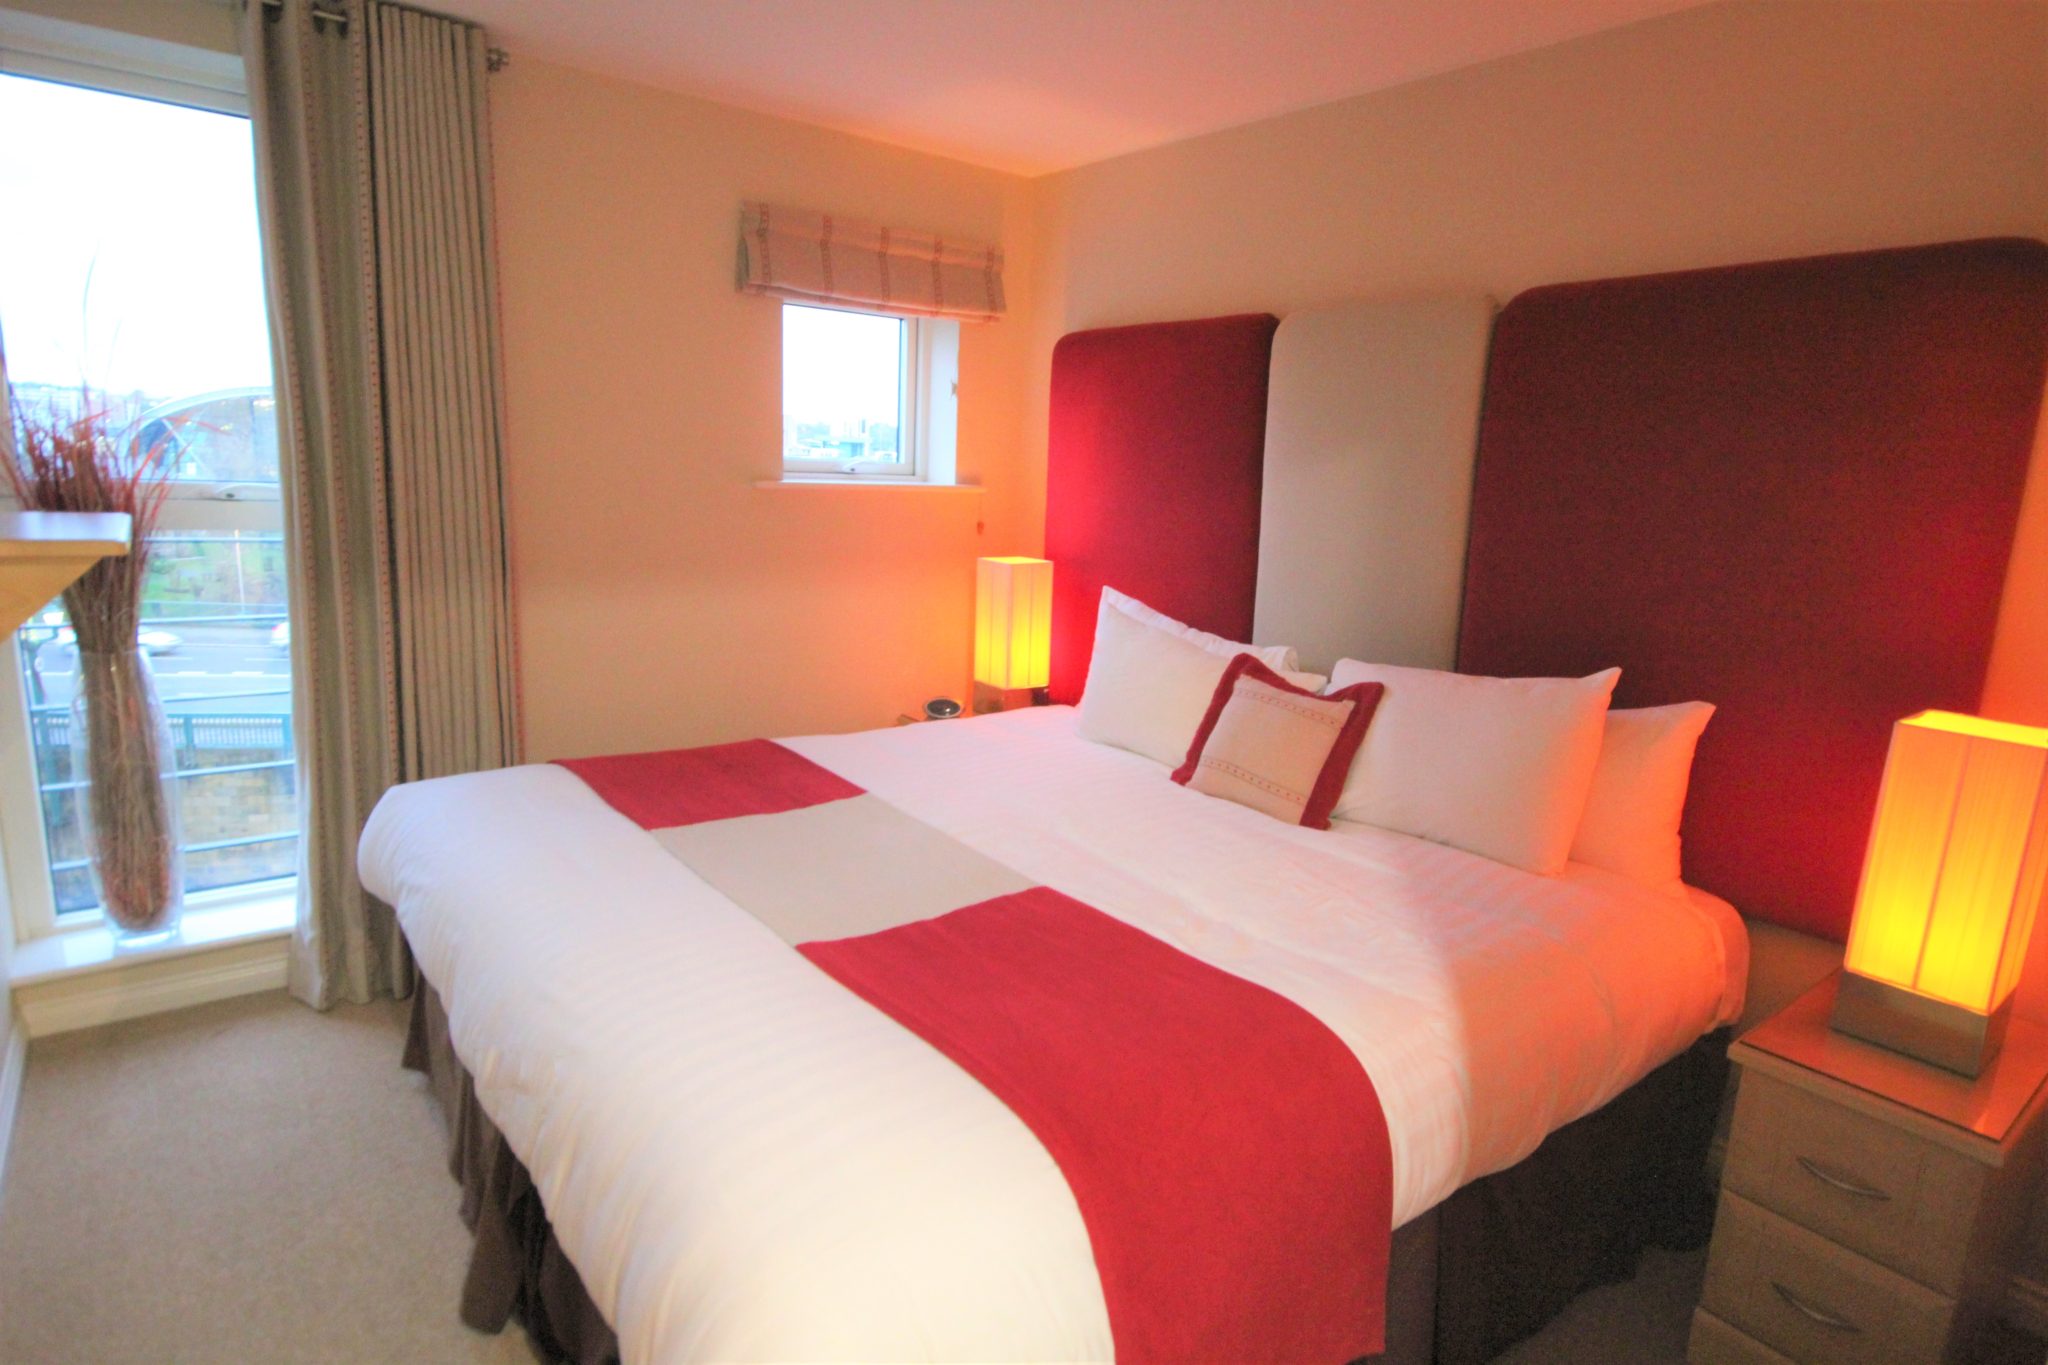 Book-Newcastle-Serviced-Accommodation-today-at-Low-Cost!-Curzon-Place-Apartments-offer-modern-Short-Lets-in-North-East-England!-Free-WIFI-&-Parking!-Urban-Stay